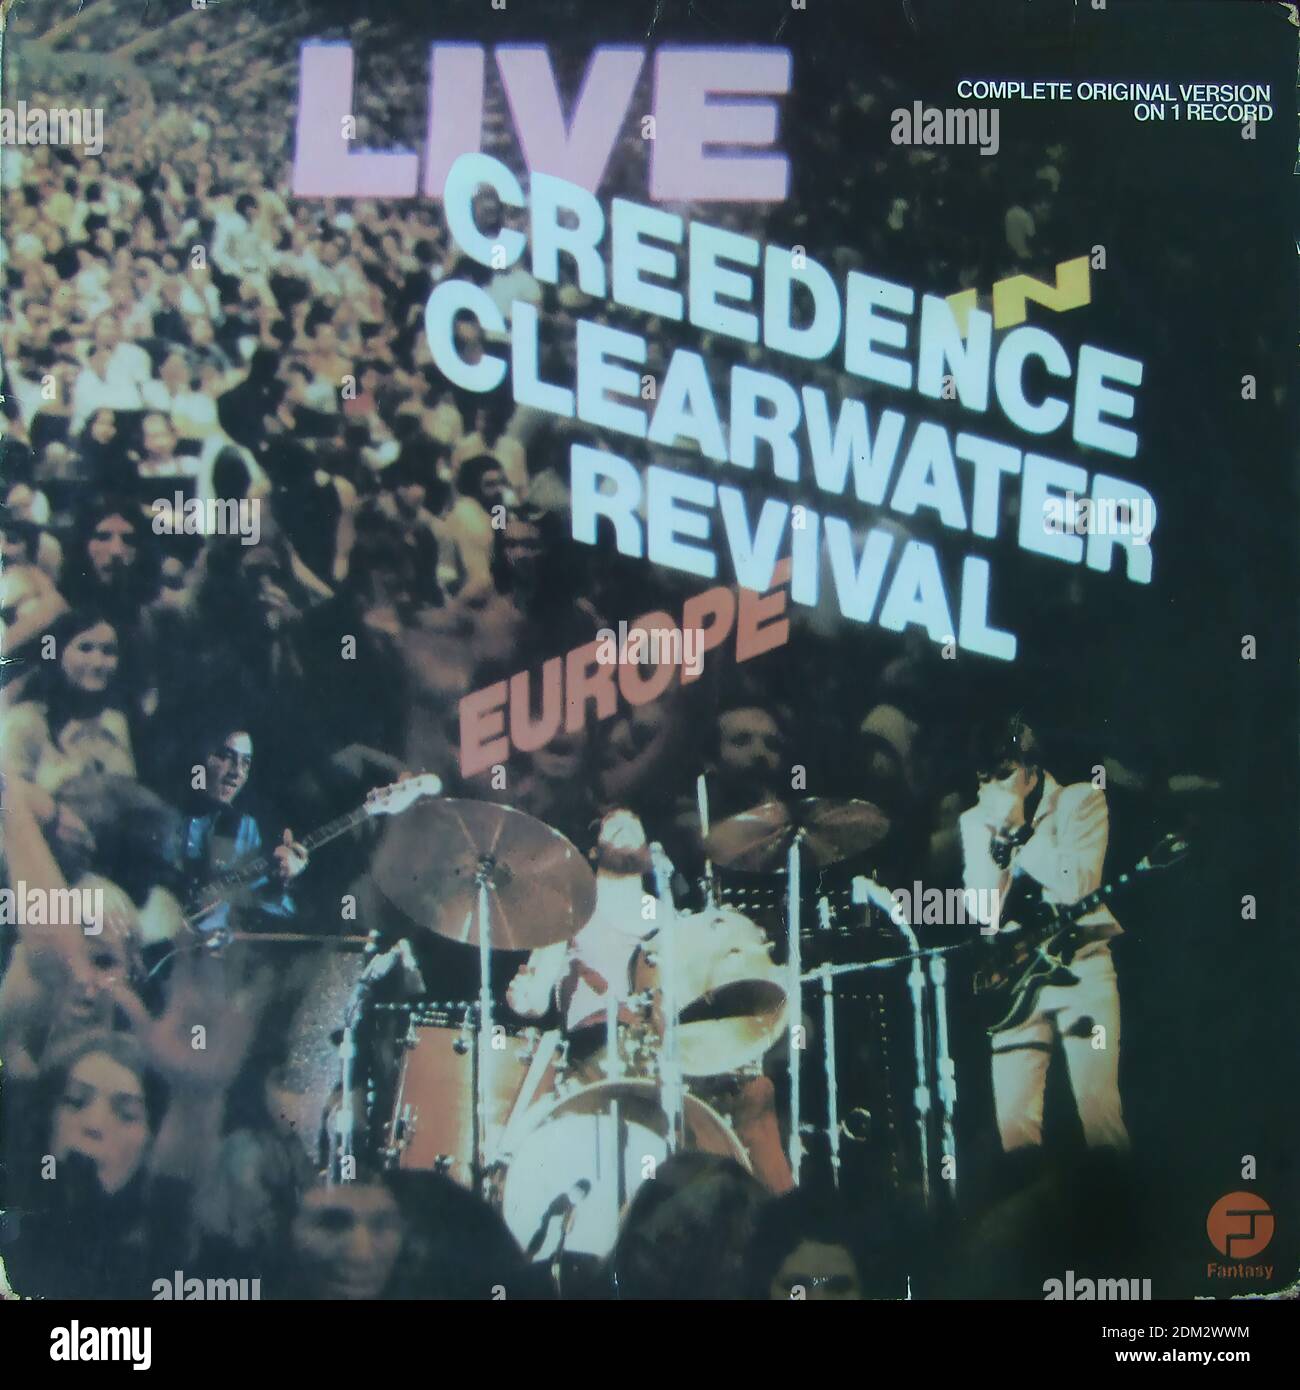 Creedence Clearwater Revival - Live In Europe - Vintage vinyl album cover Stock Photo